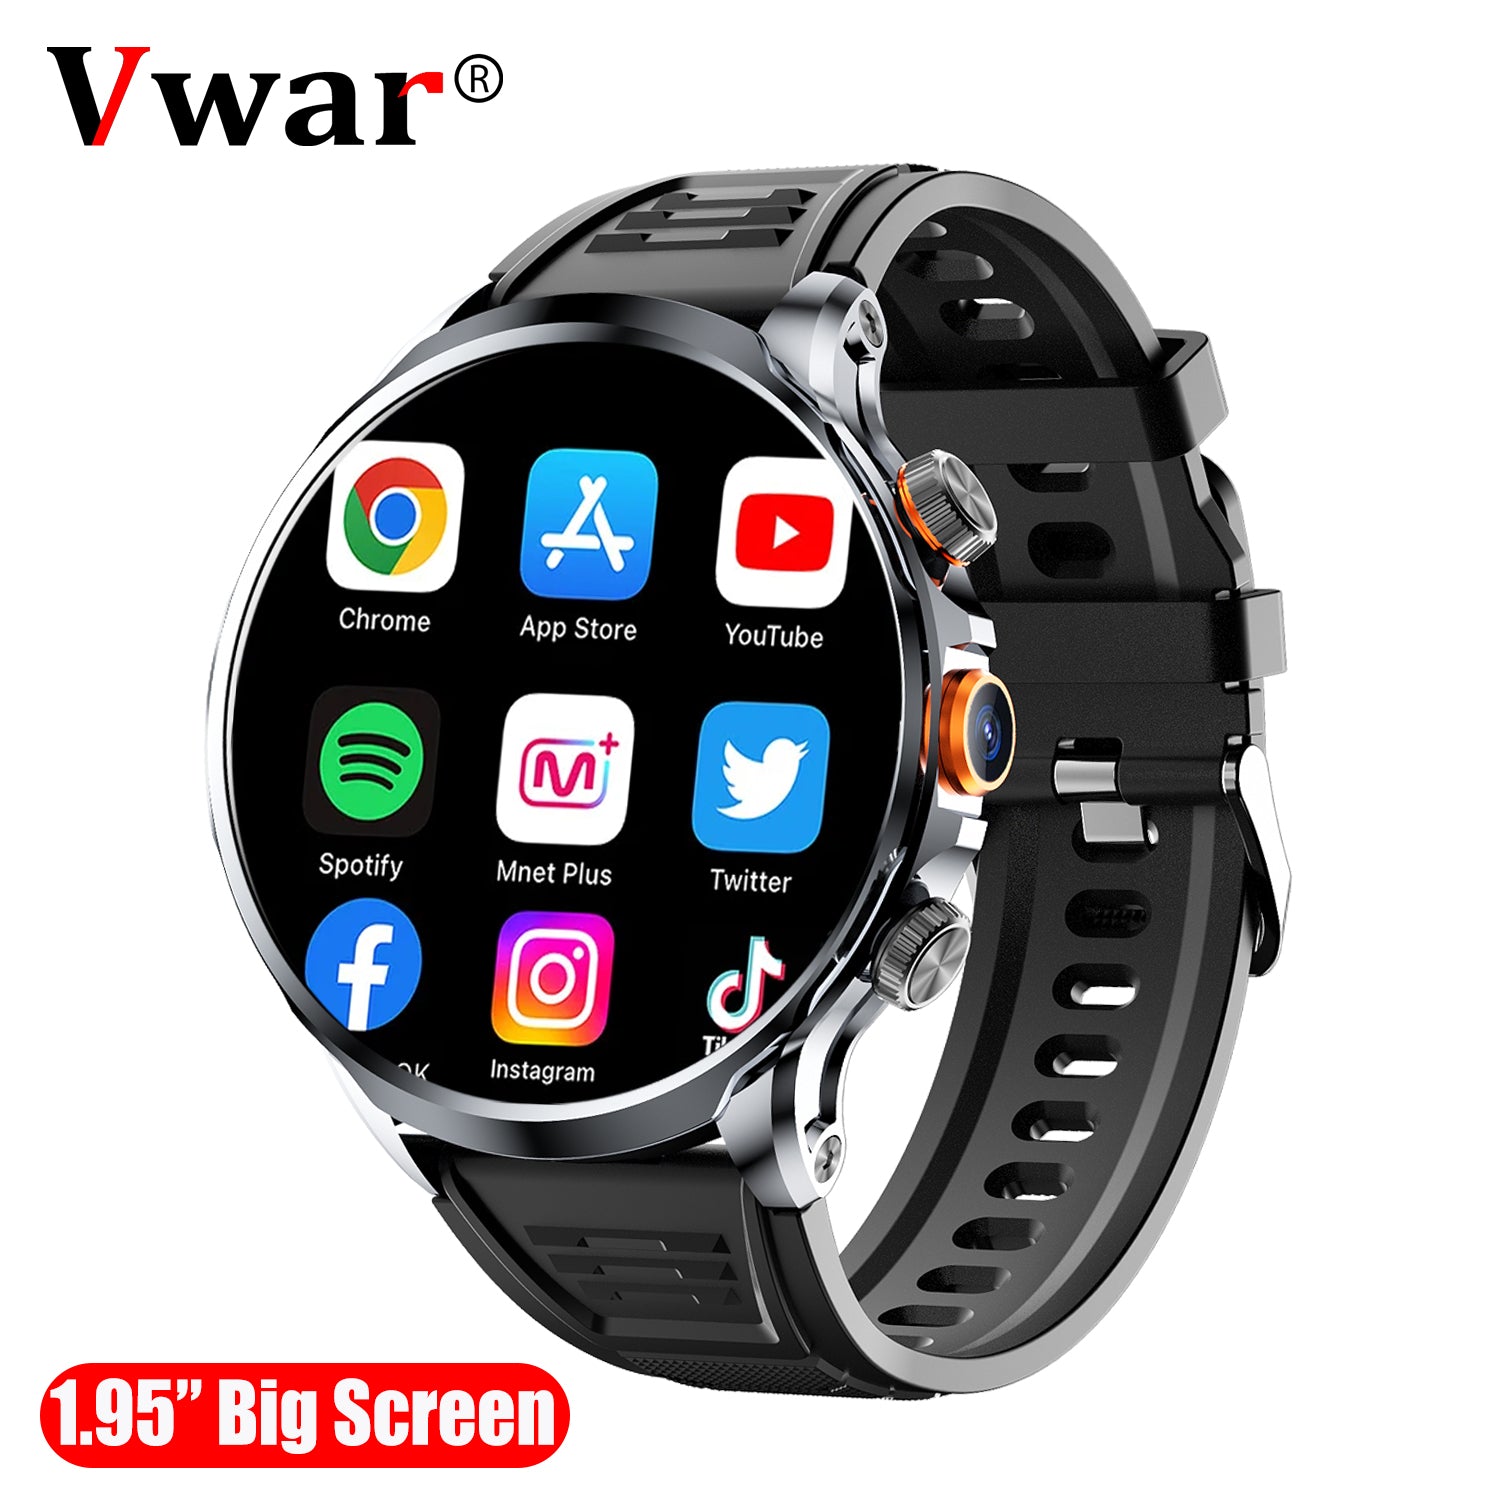 Vwar Core3 Android Smart Watch 4G LTE 1.95" Big Screen with SIM Slot Camera WIFI GPS